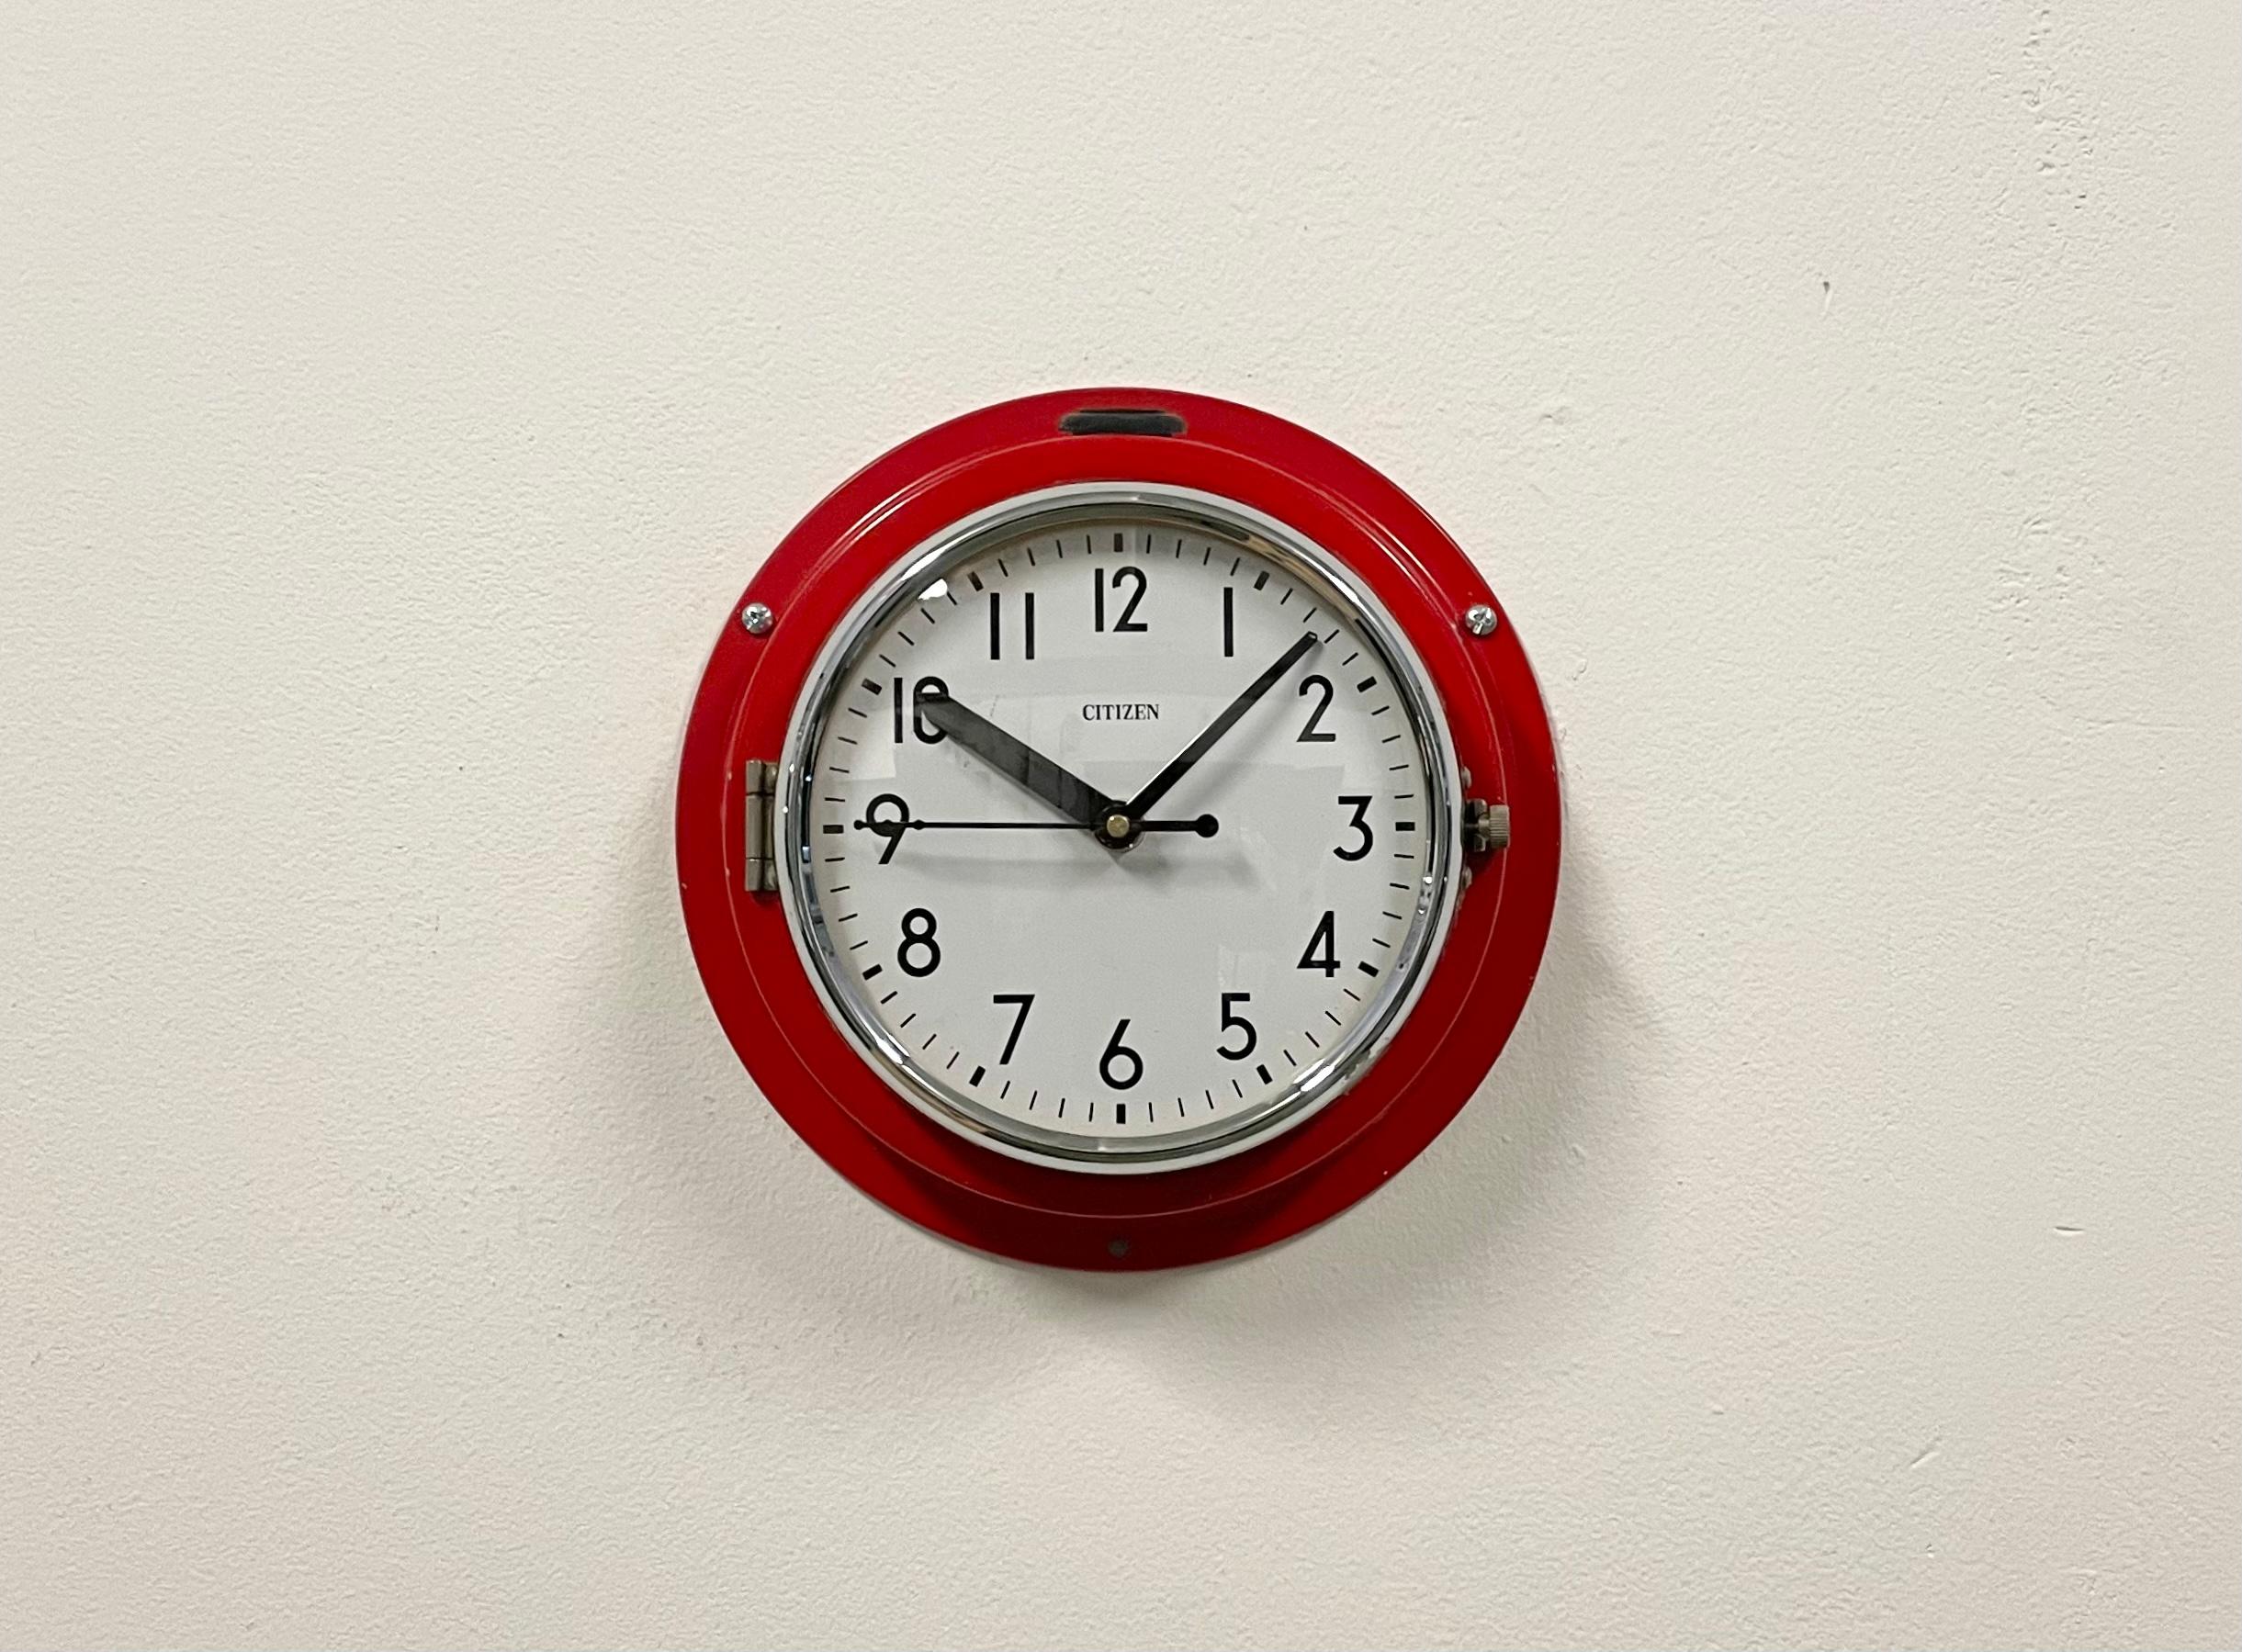 Vintage Citizen navy slave clock designed during the 1970s and produced till 1990s. These clocks were used on large Japanese tankers and cargo ships. It features a red metal frame, a plastic dial and curved clear glass cover. This item has been